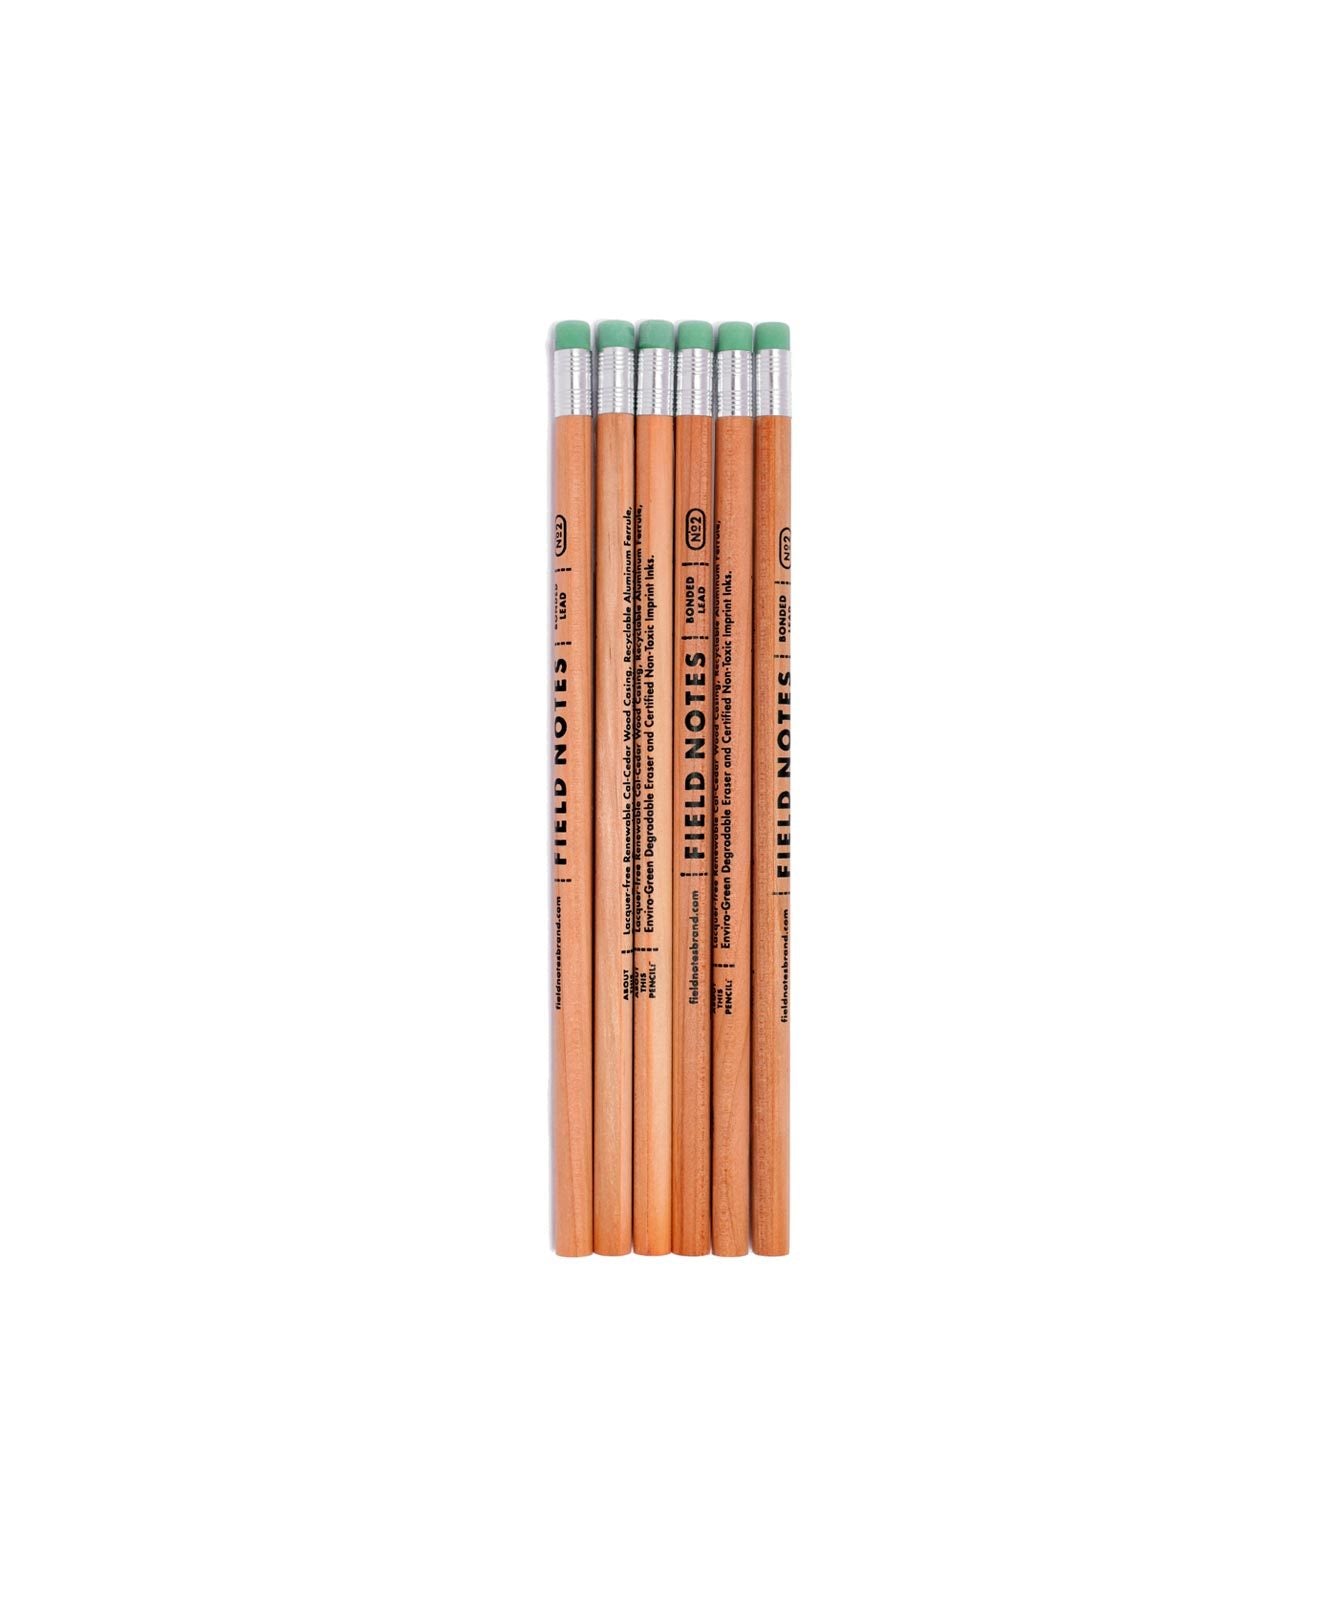 6 natural wood finish pencils with aluminum ferrules and green erasers. Stamped with Field Notes logo in black ink.